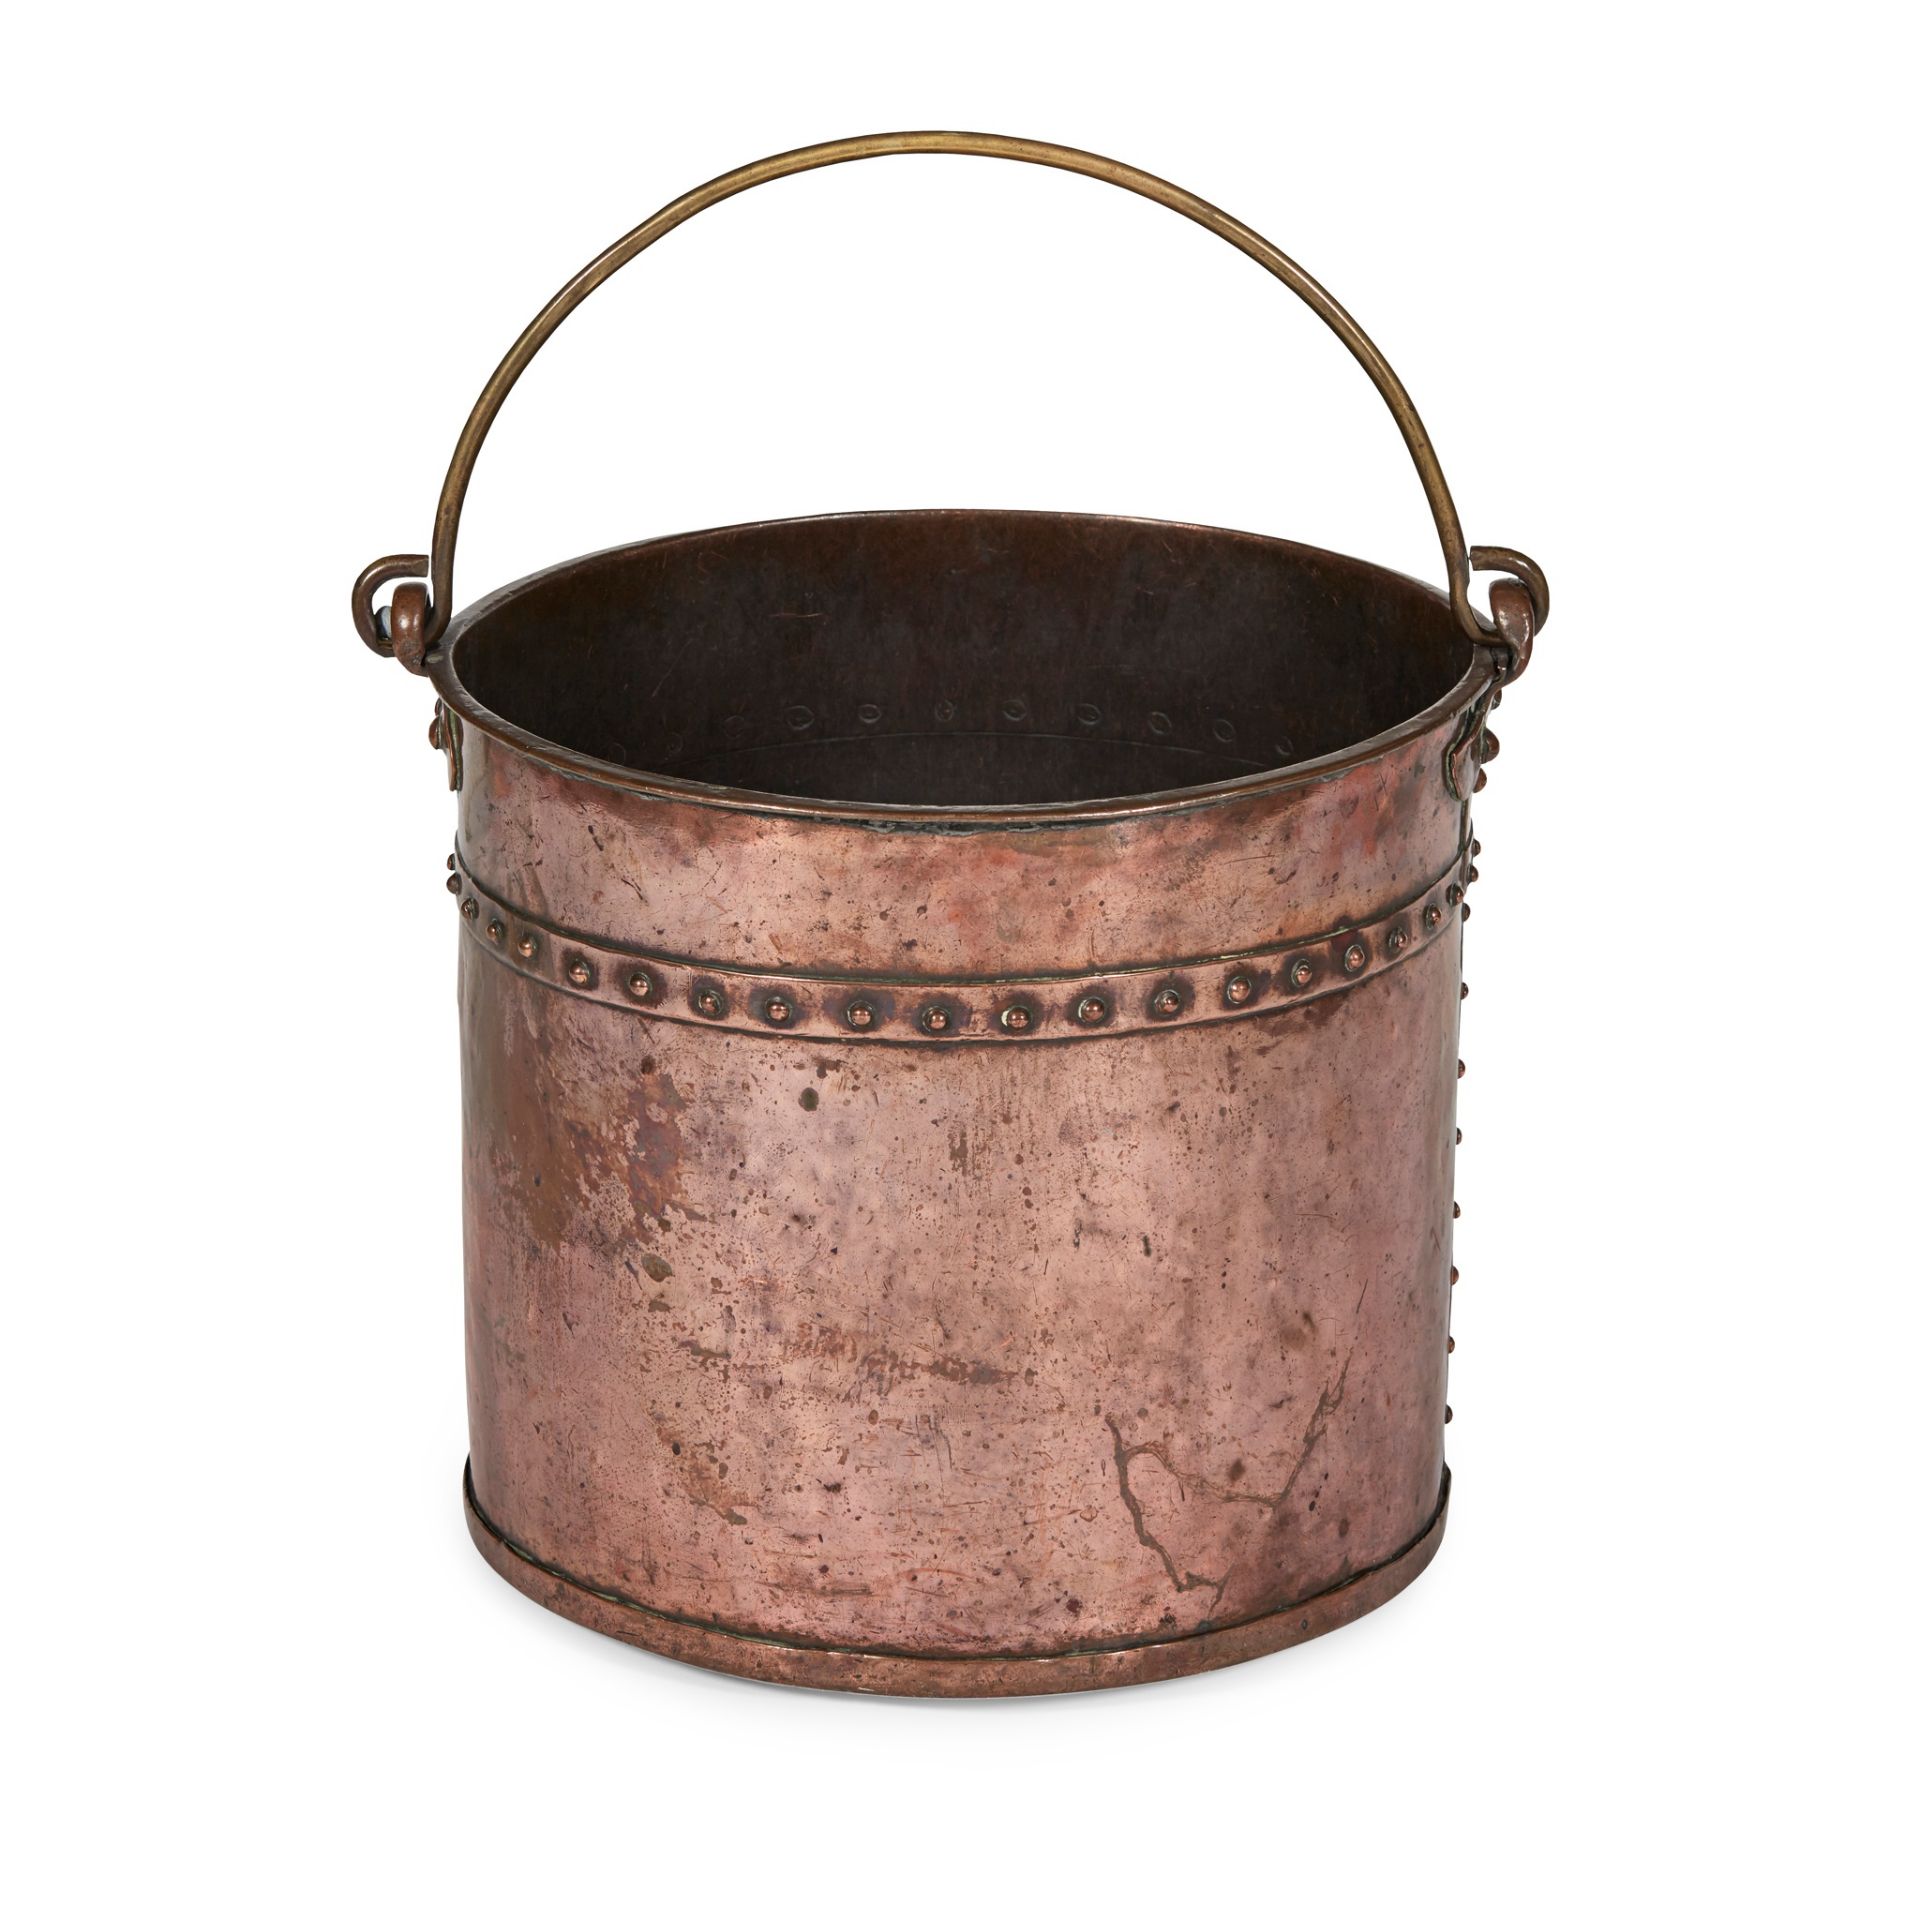 DUTCH COPPER AND BRASS MILK PAIL EARLY 19TH CENTURY